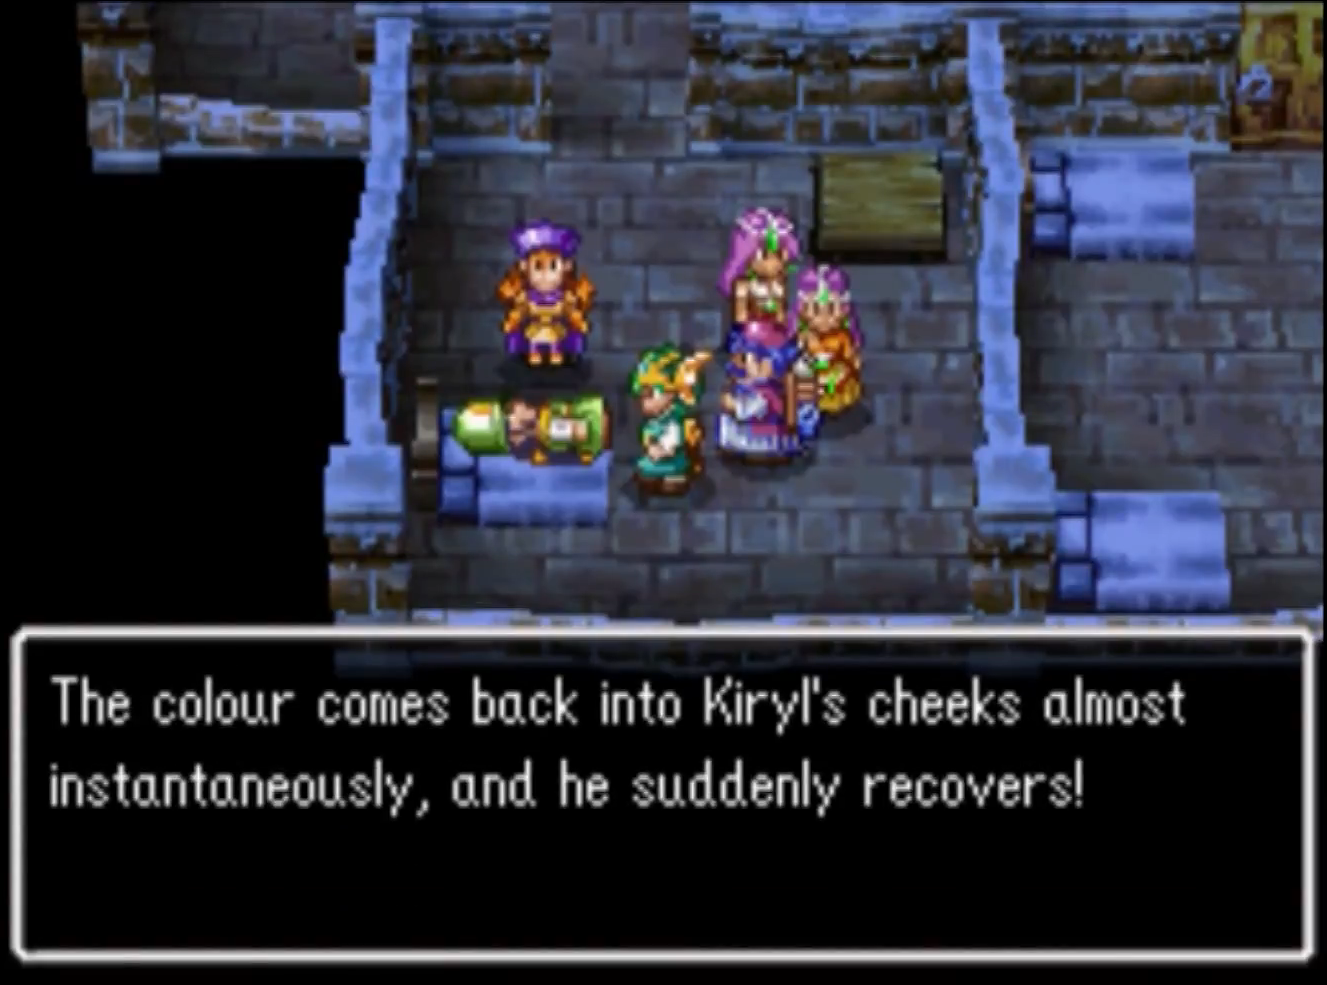 Giving the Feverfew Root to Kiryl will heal him instantly | Dragon Quest IV